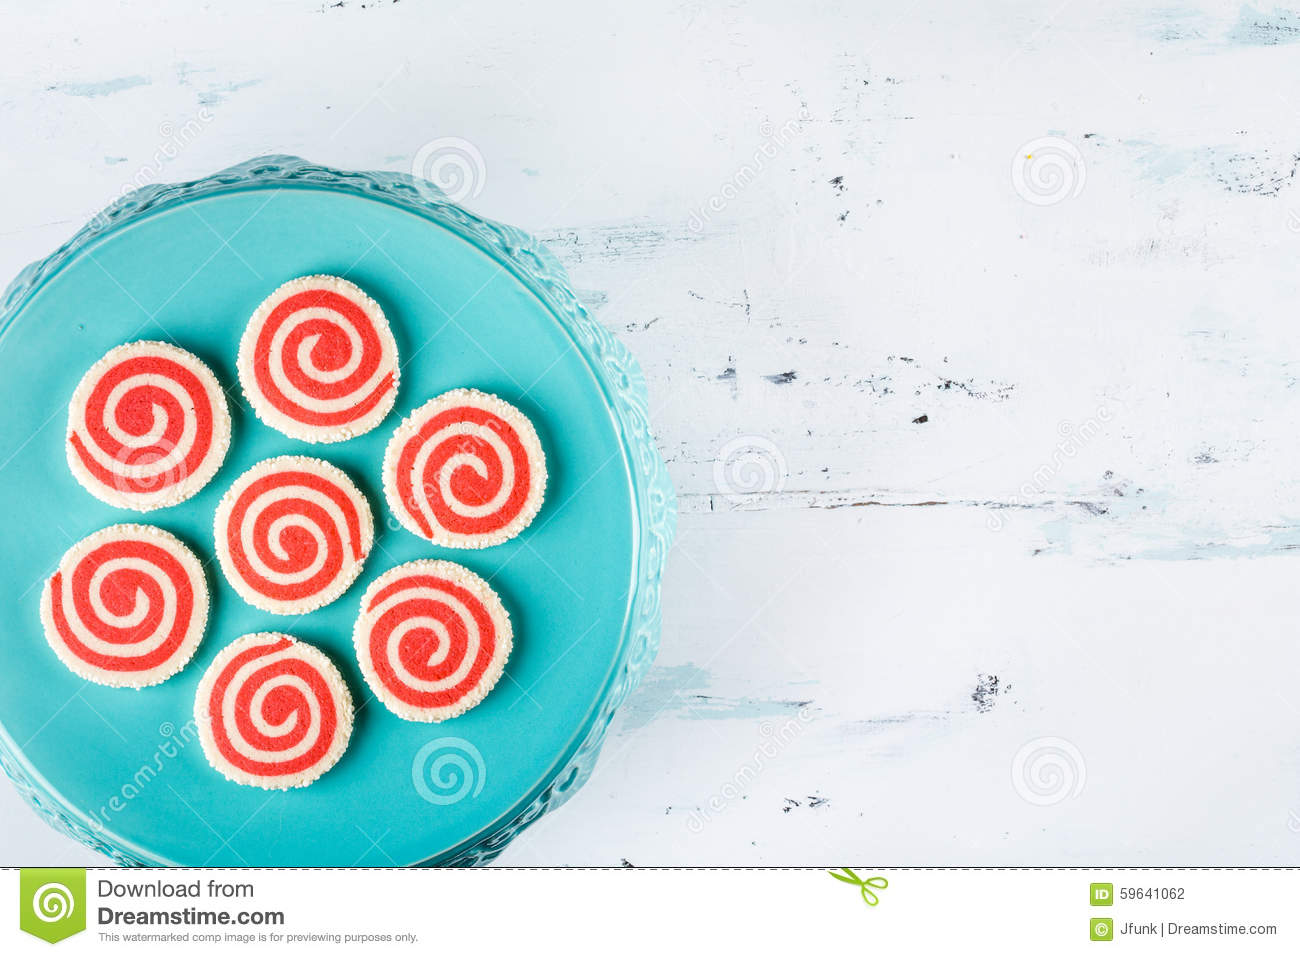 Red And White Pinwheel Christmas Cookies On A Teal Plate